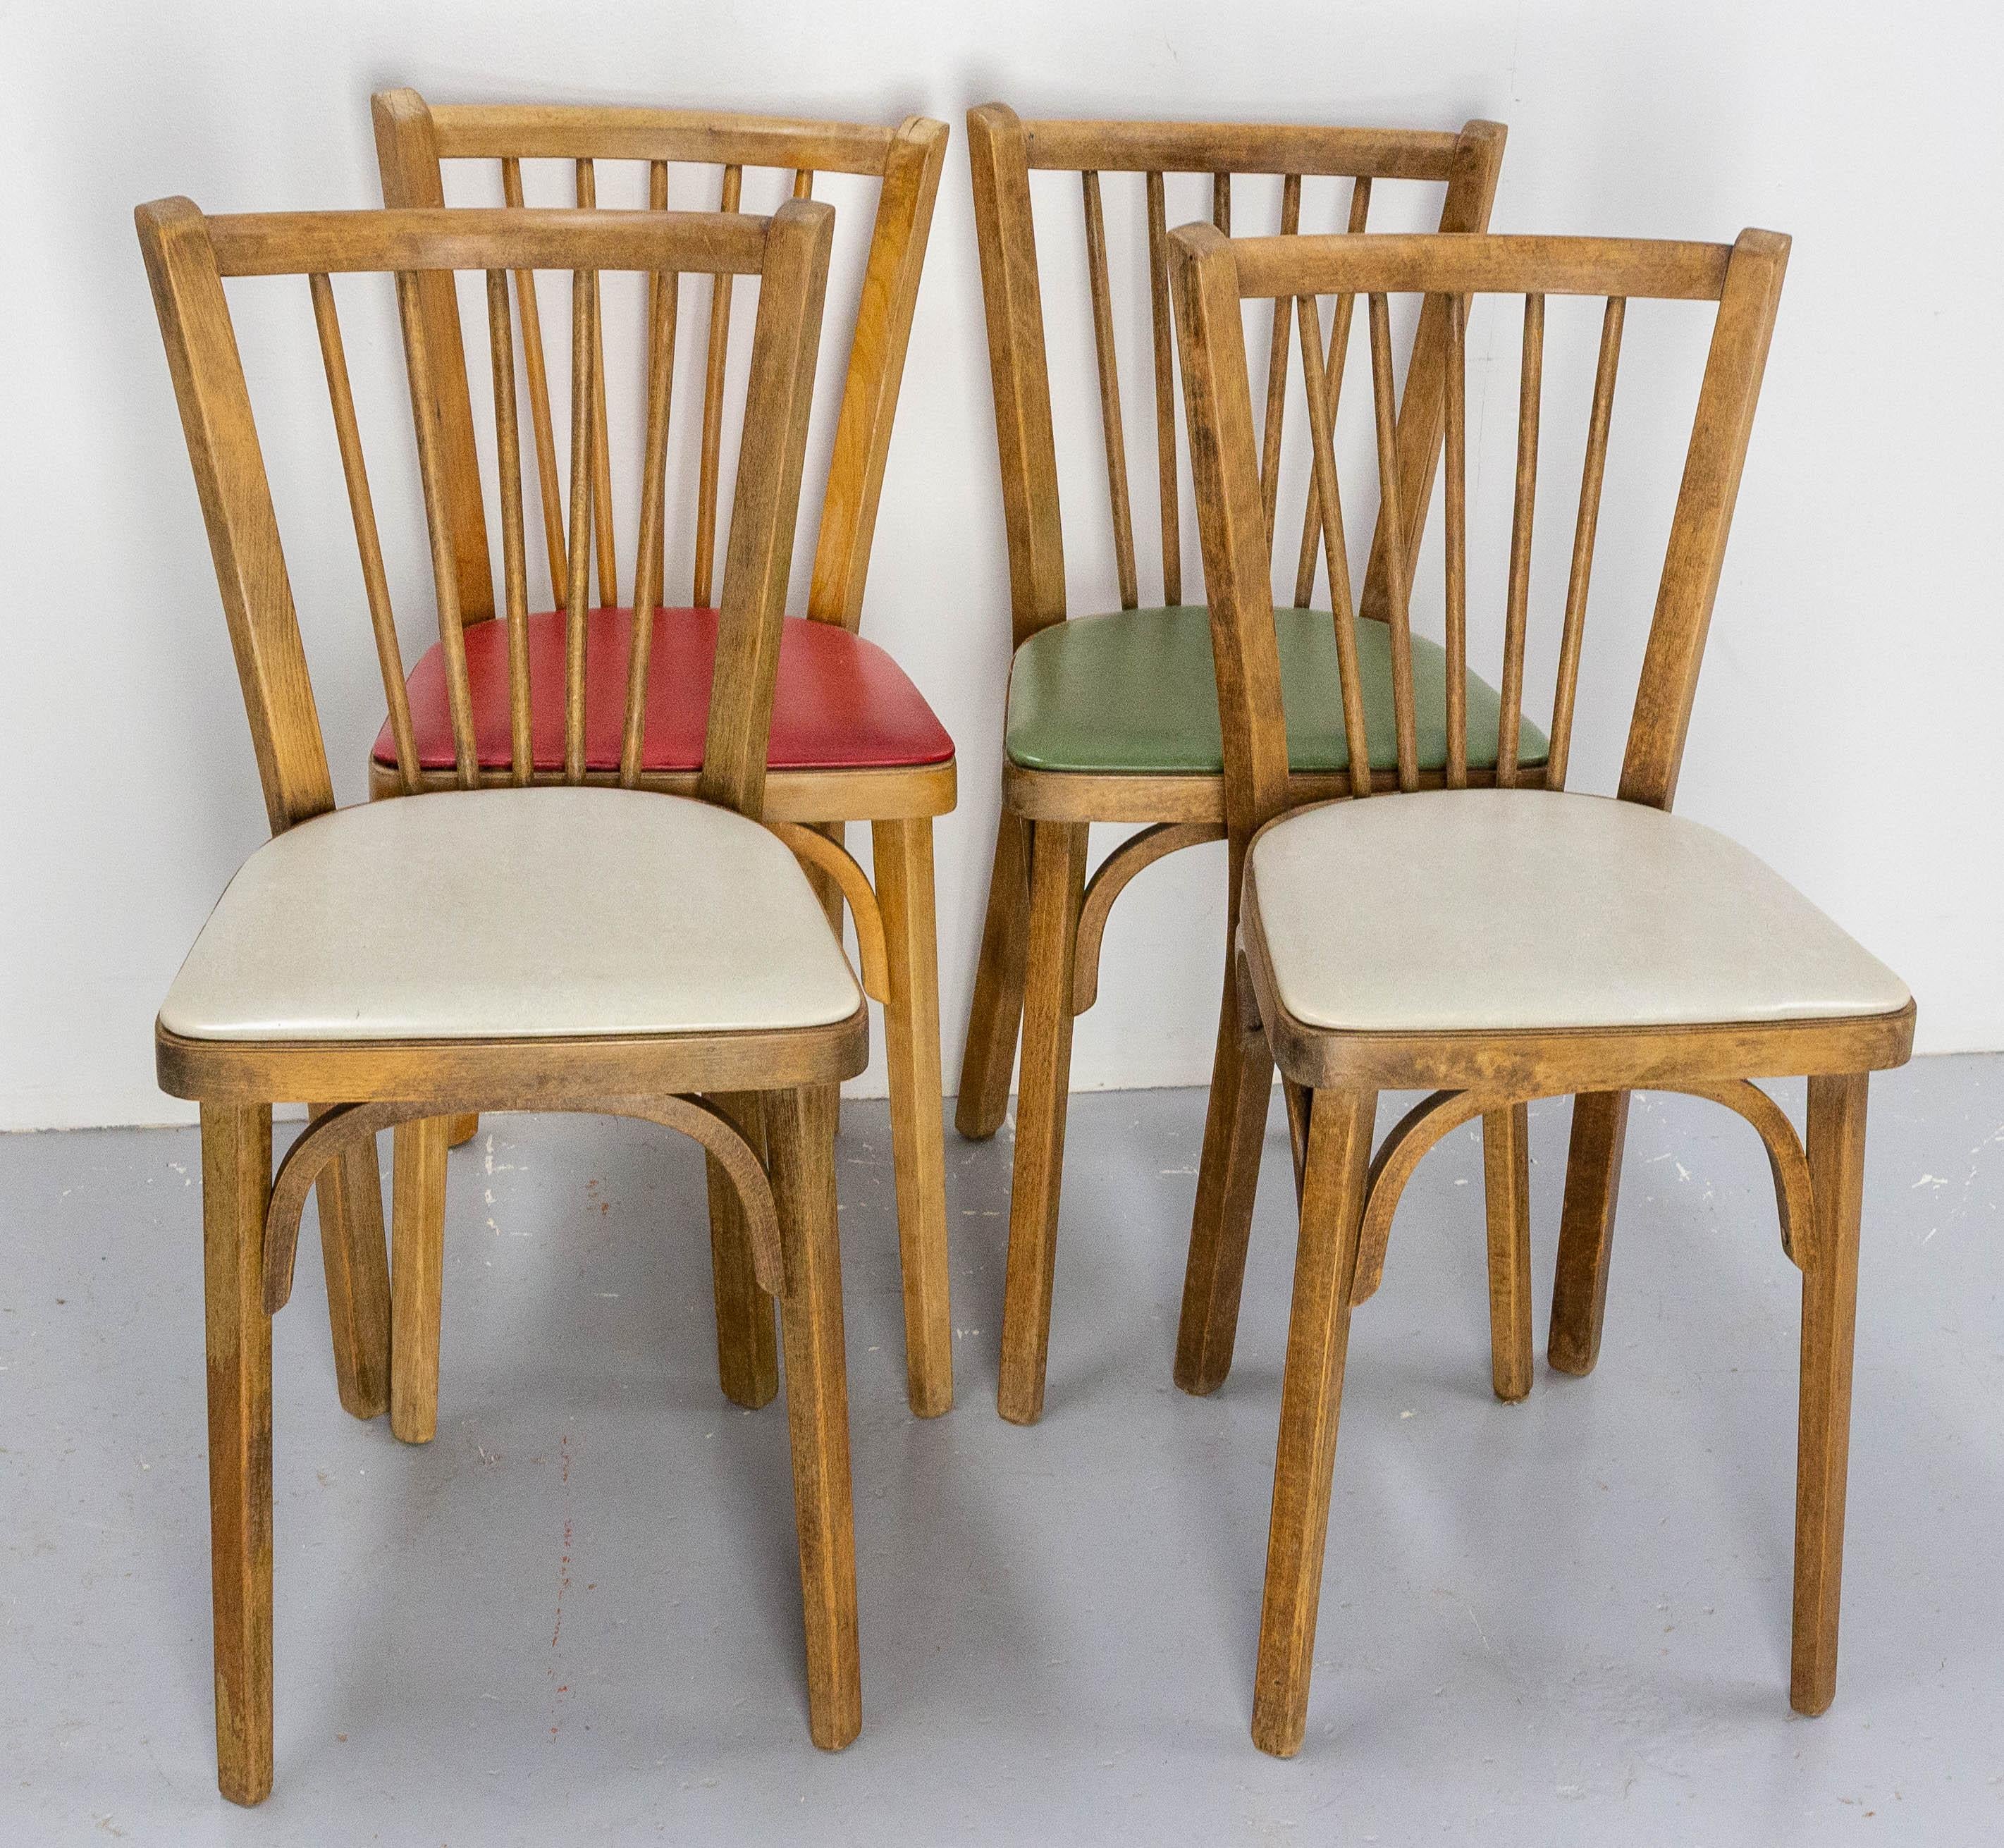 Four Bistro Dining Chairs Baumann Beech and Skai France Midcentury, circa 1950 For Sale 7